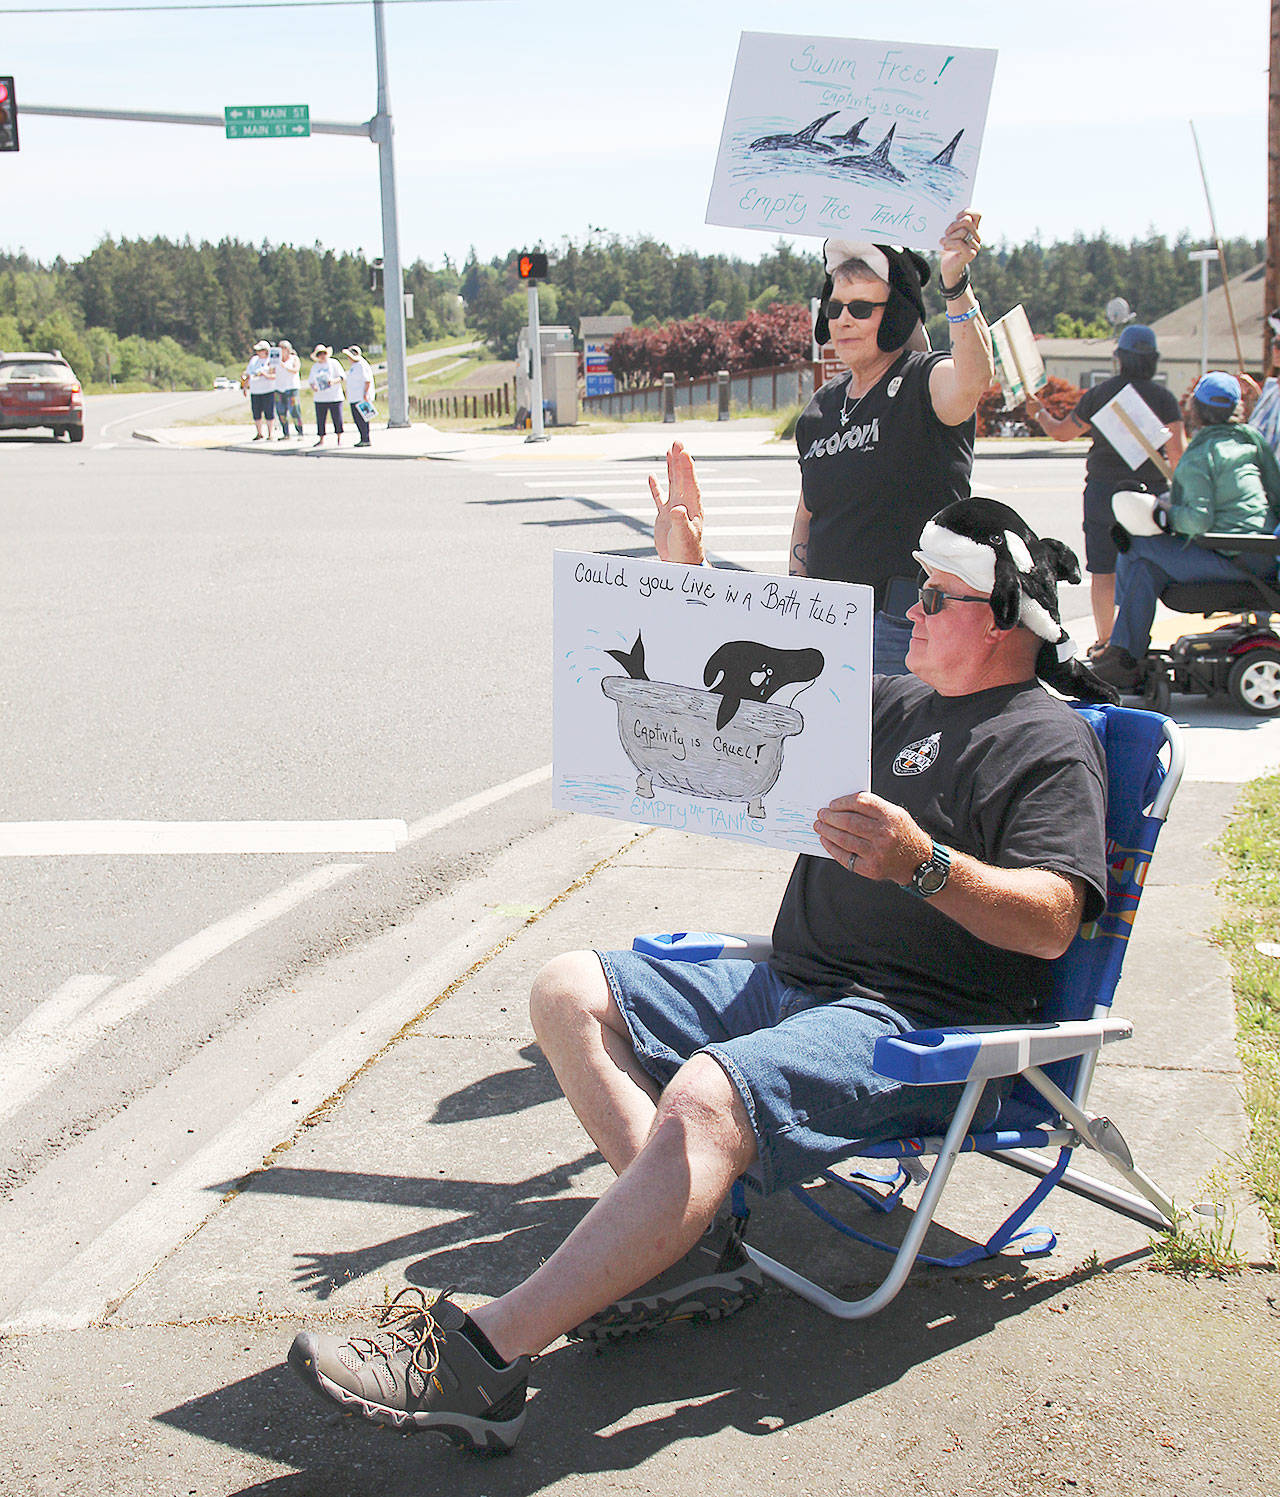 Photo by Laura Guido/Whidbey News-Times)                                Gary and Tammy Shelton traveled to Coupeville from Port Ludlow to participate in the annual Empty the Tanks protest to advocate for the release of orcas. Though it is a worldwide event, the local gathering focused on Lolita — the last remaining survivor of the infamous 1970 Penn Cove orca capture.